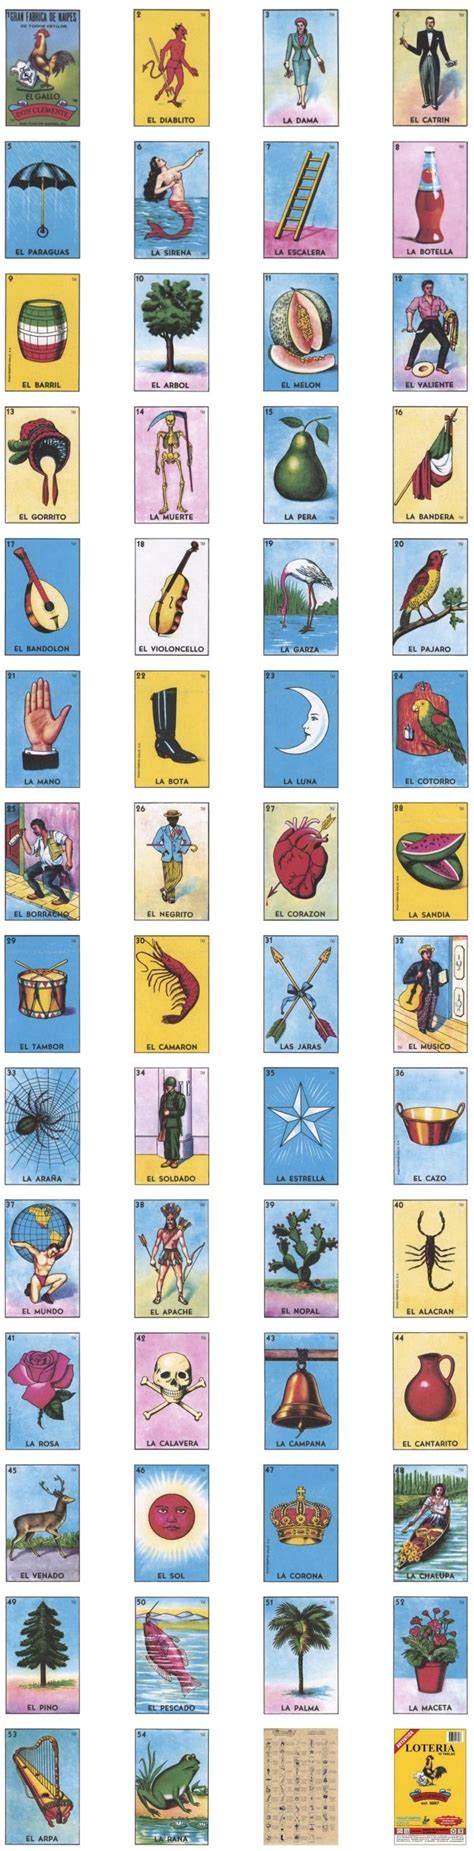 Loteria Cards Printable 91 Images In Collection Page 1 Loteria